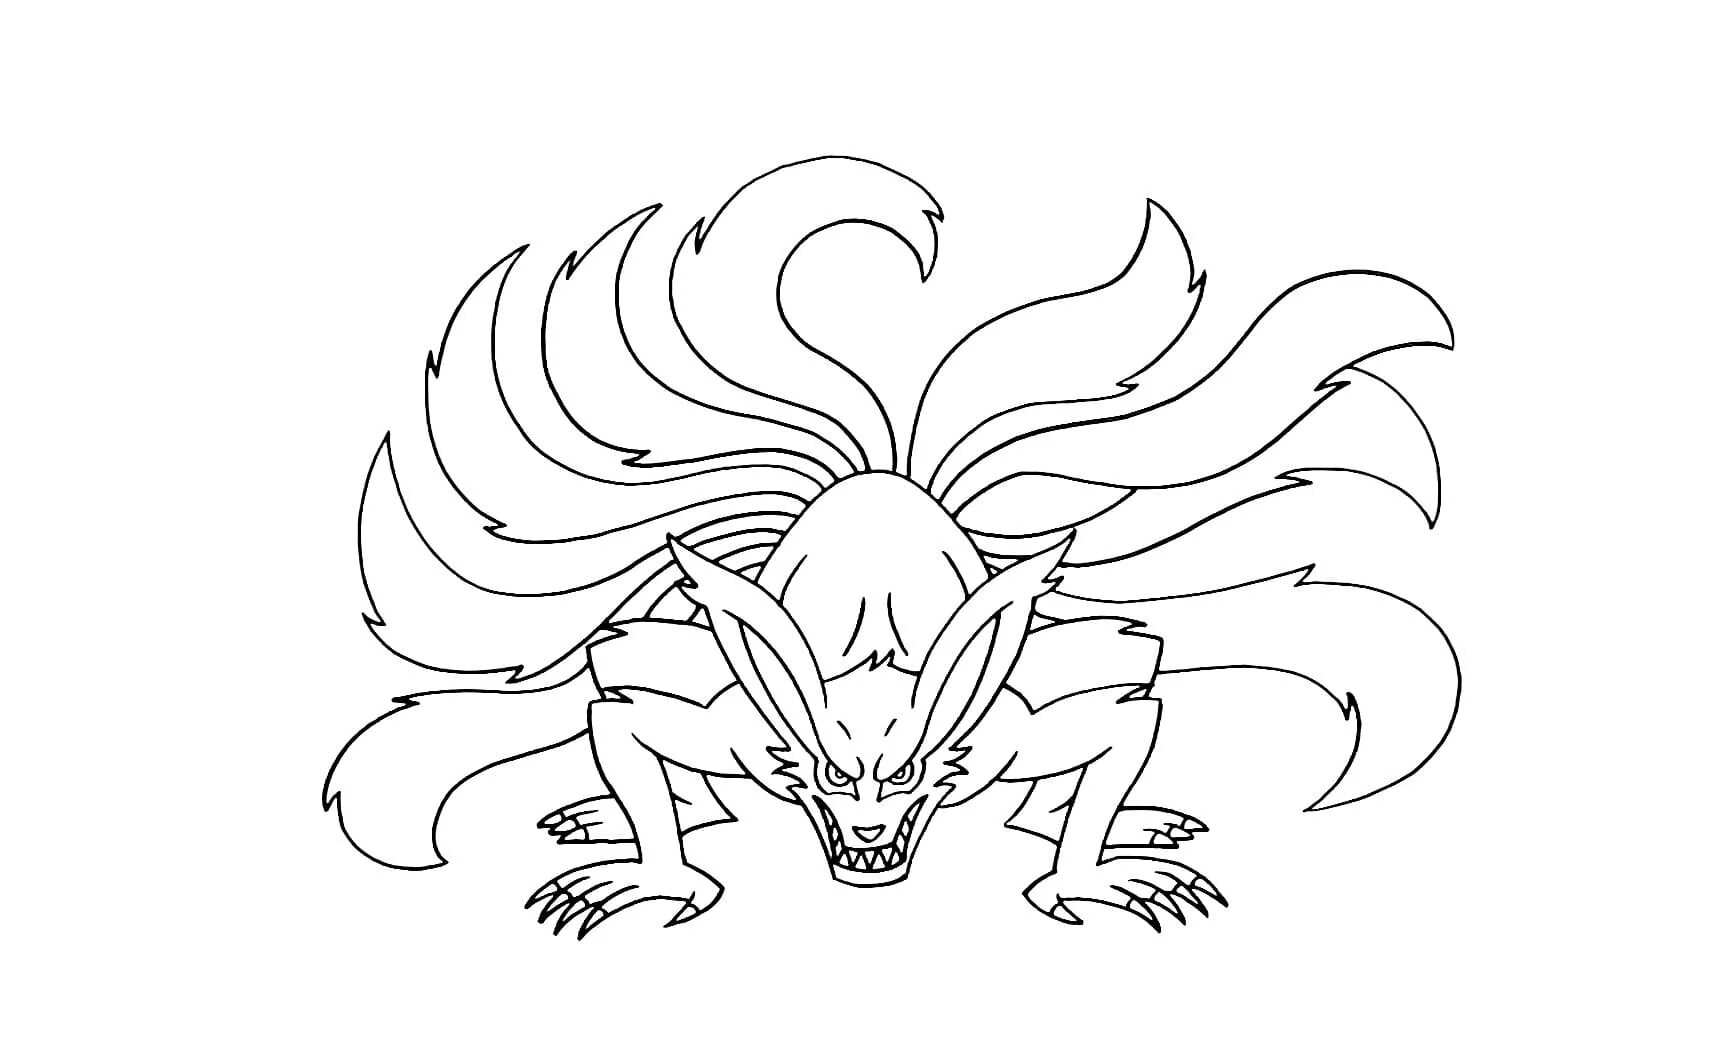 Surreal 9-tailed fox coloring page